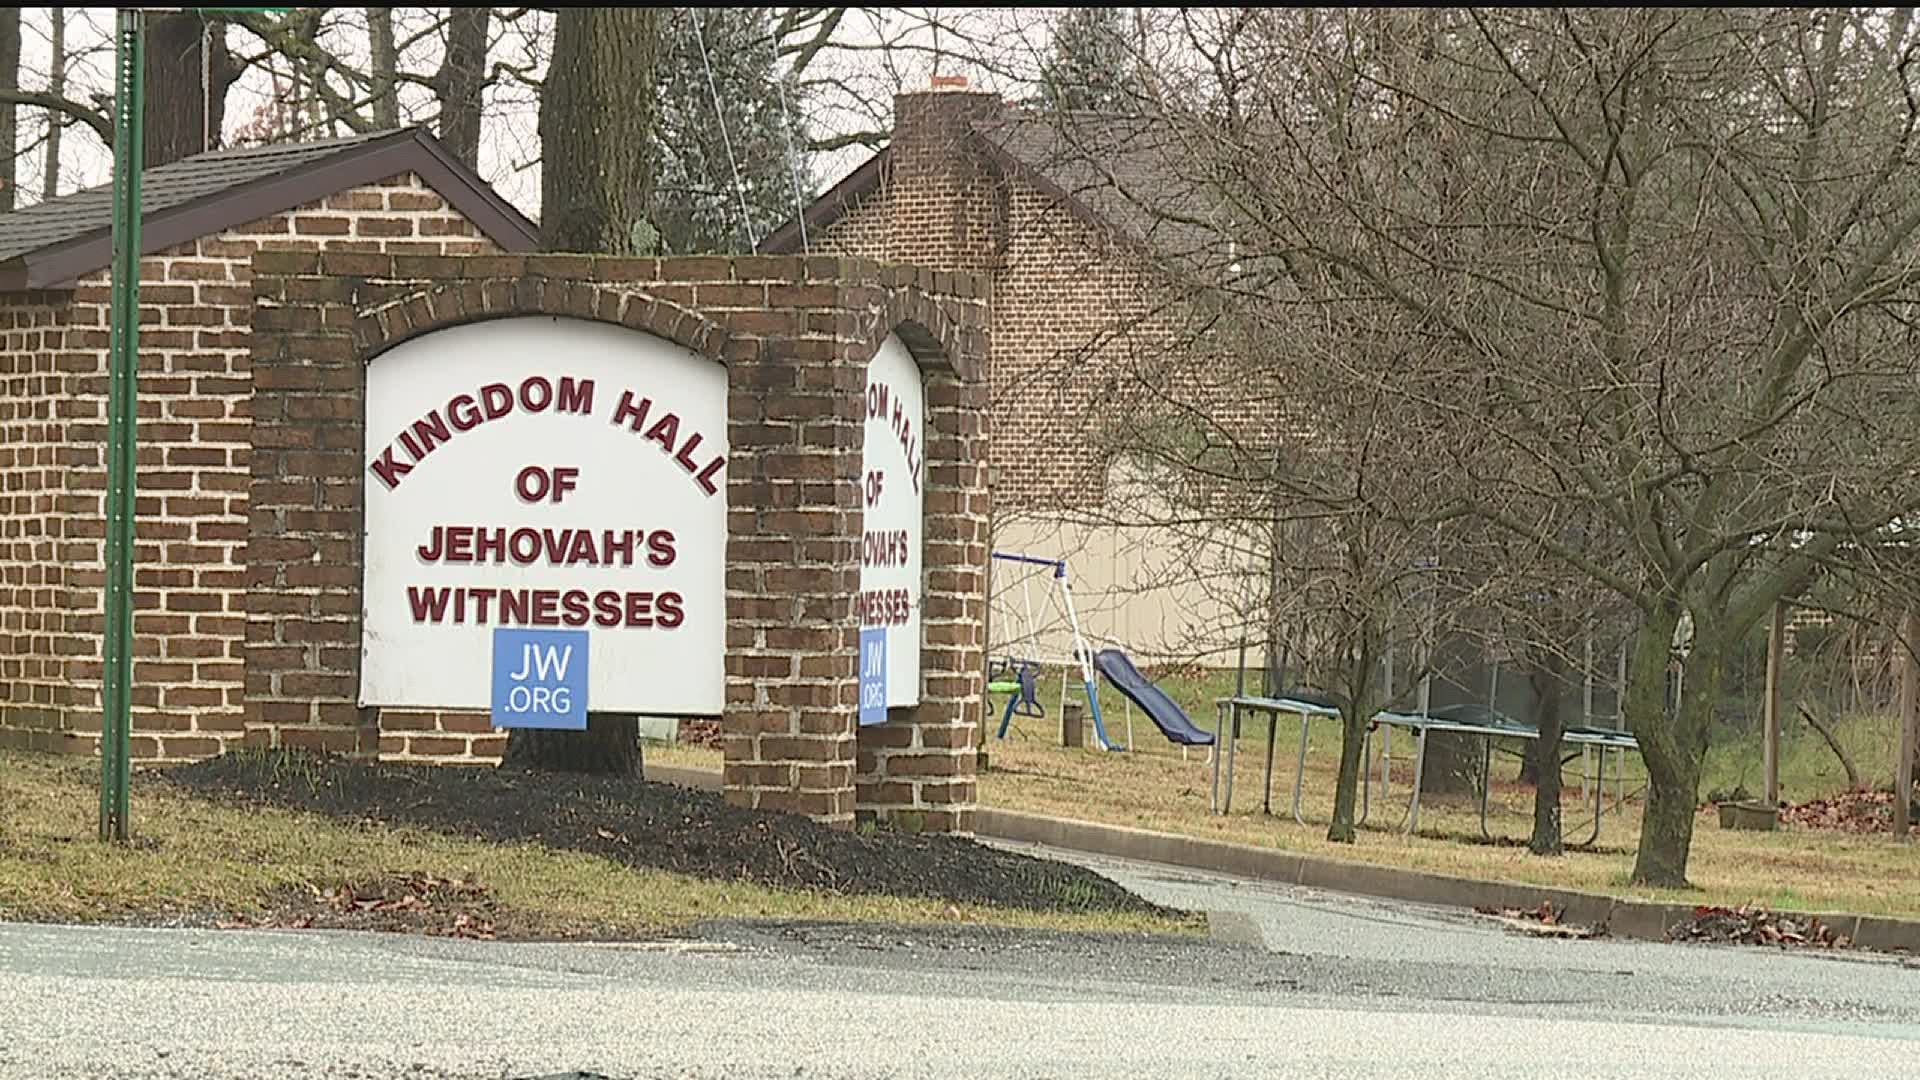 Jehovah’s witnesses child sex abuse allegations